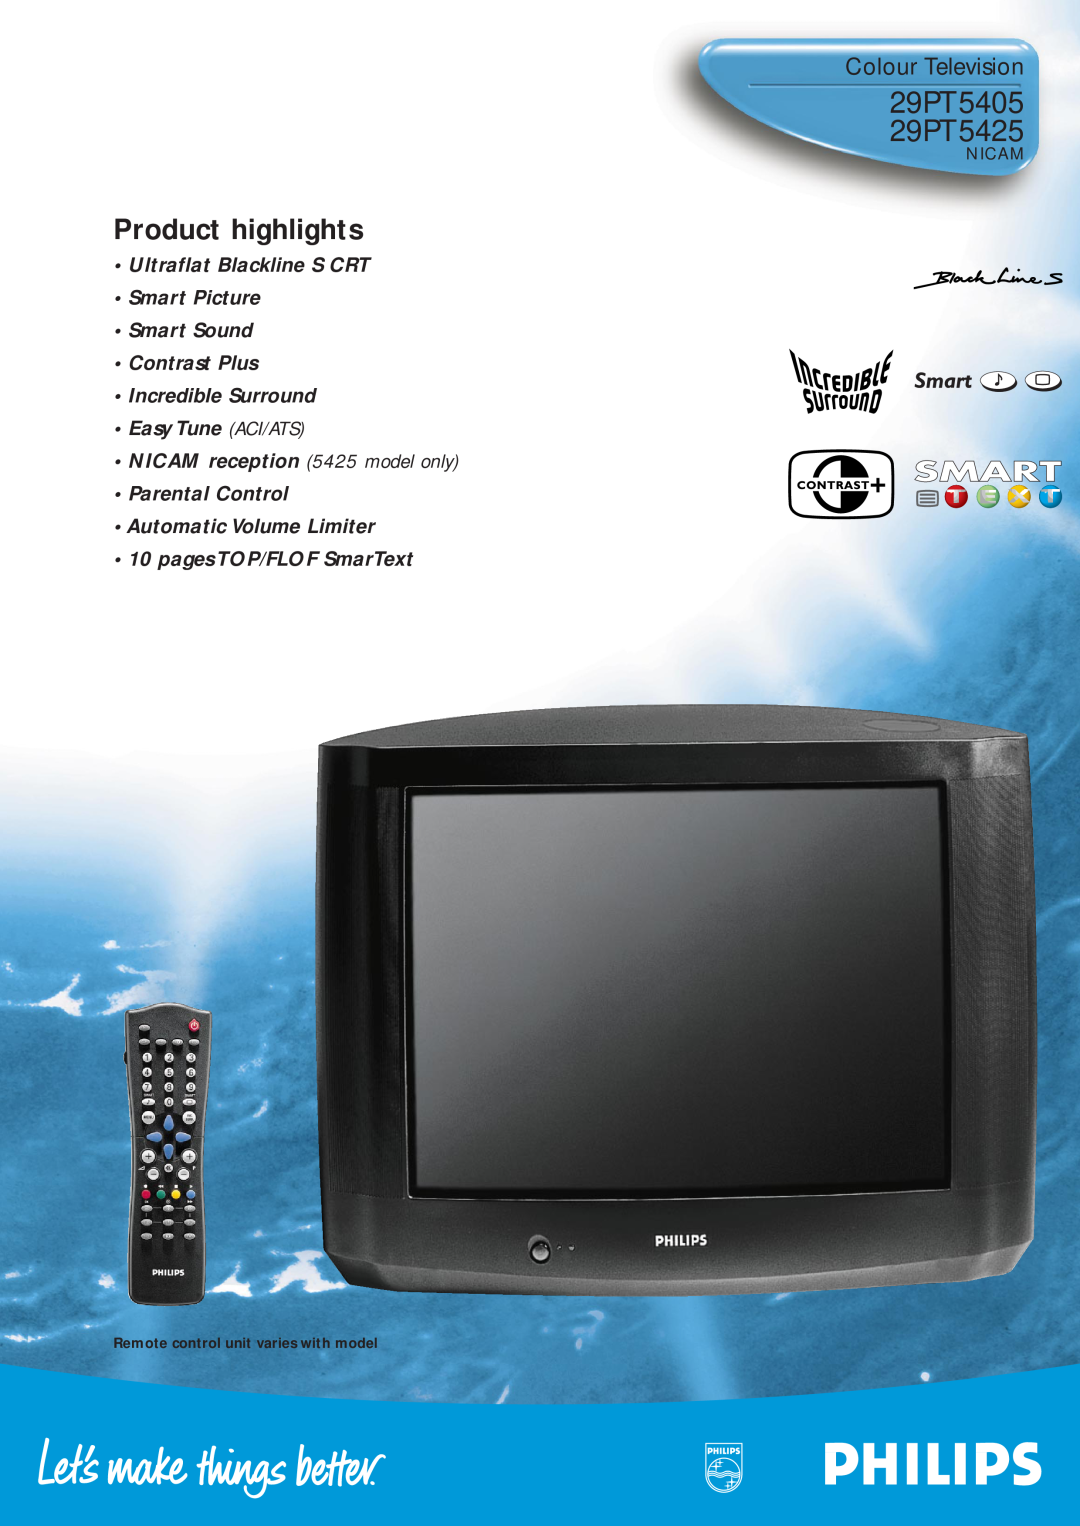 Philips manual 29PT5405 29PT5425, Product highlights, Colour Television, Nicam, Remote control unit varies with model 